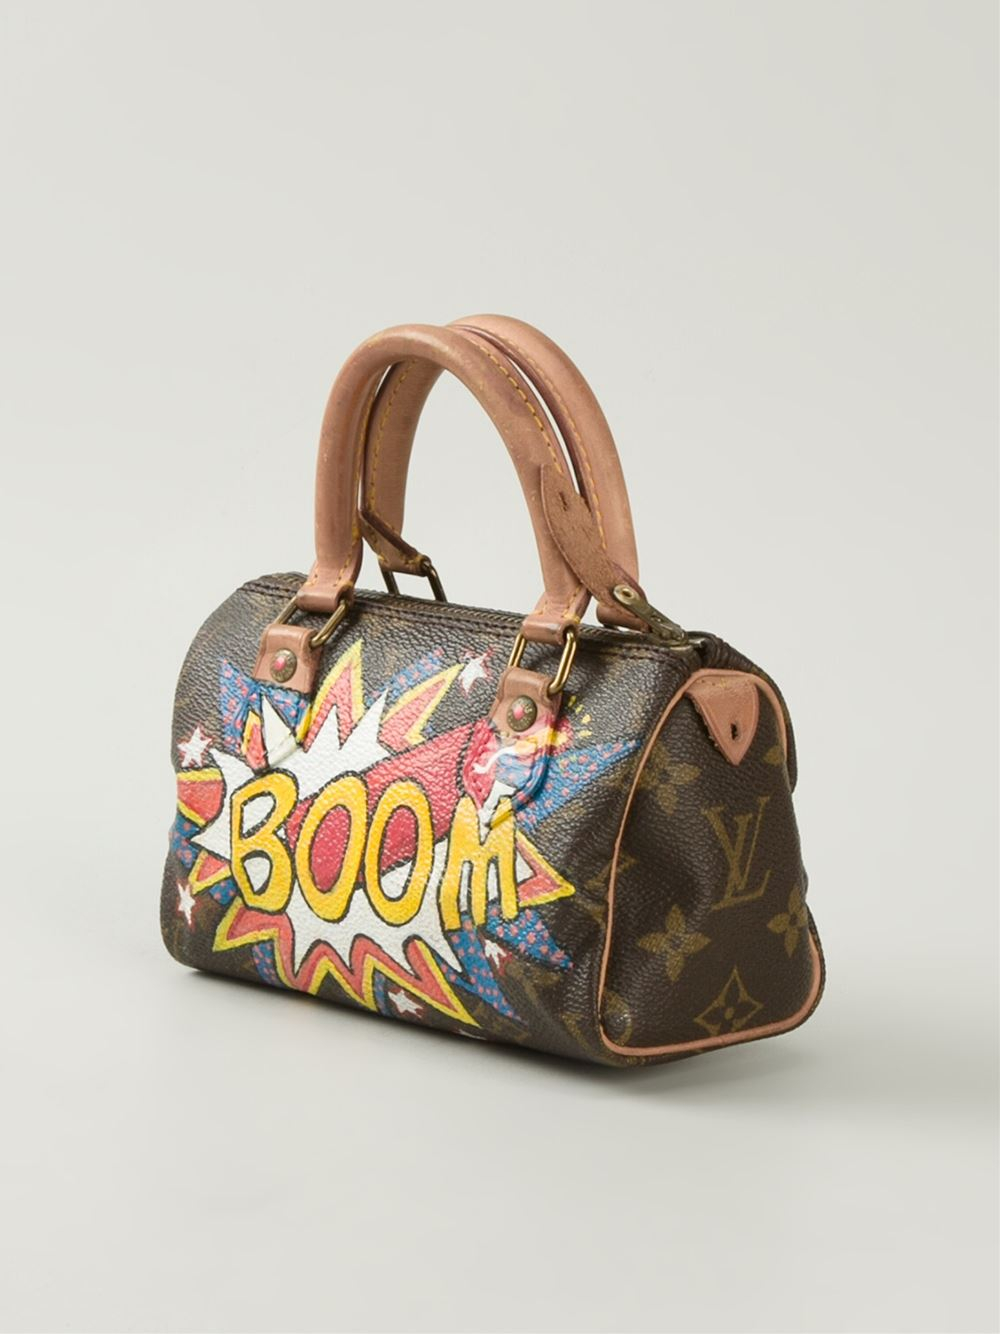 Louis Vuitton Bowling Ball Handbags | Confederated Tribes of the Umatilla Indian Reservation